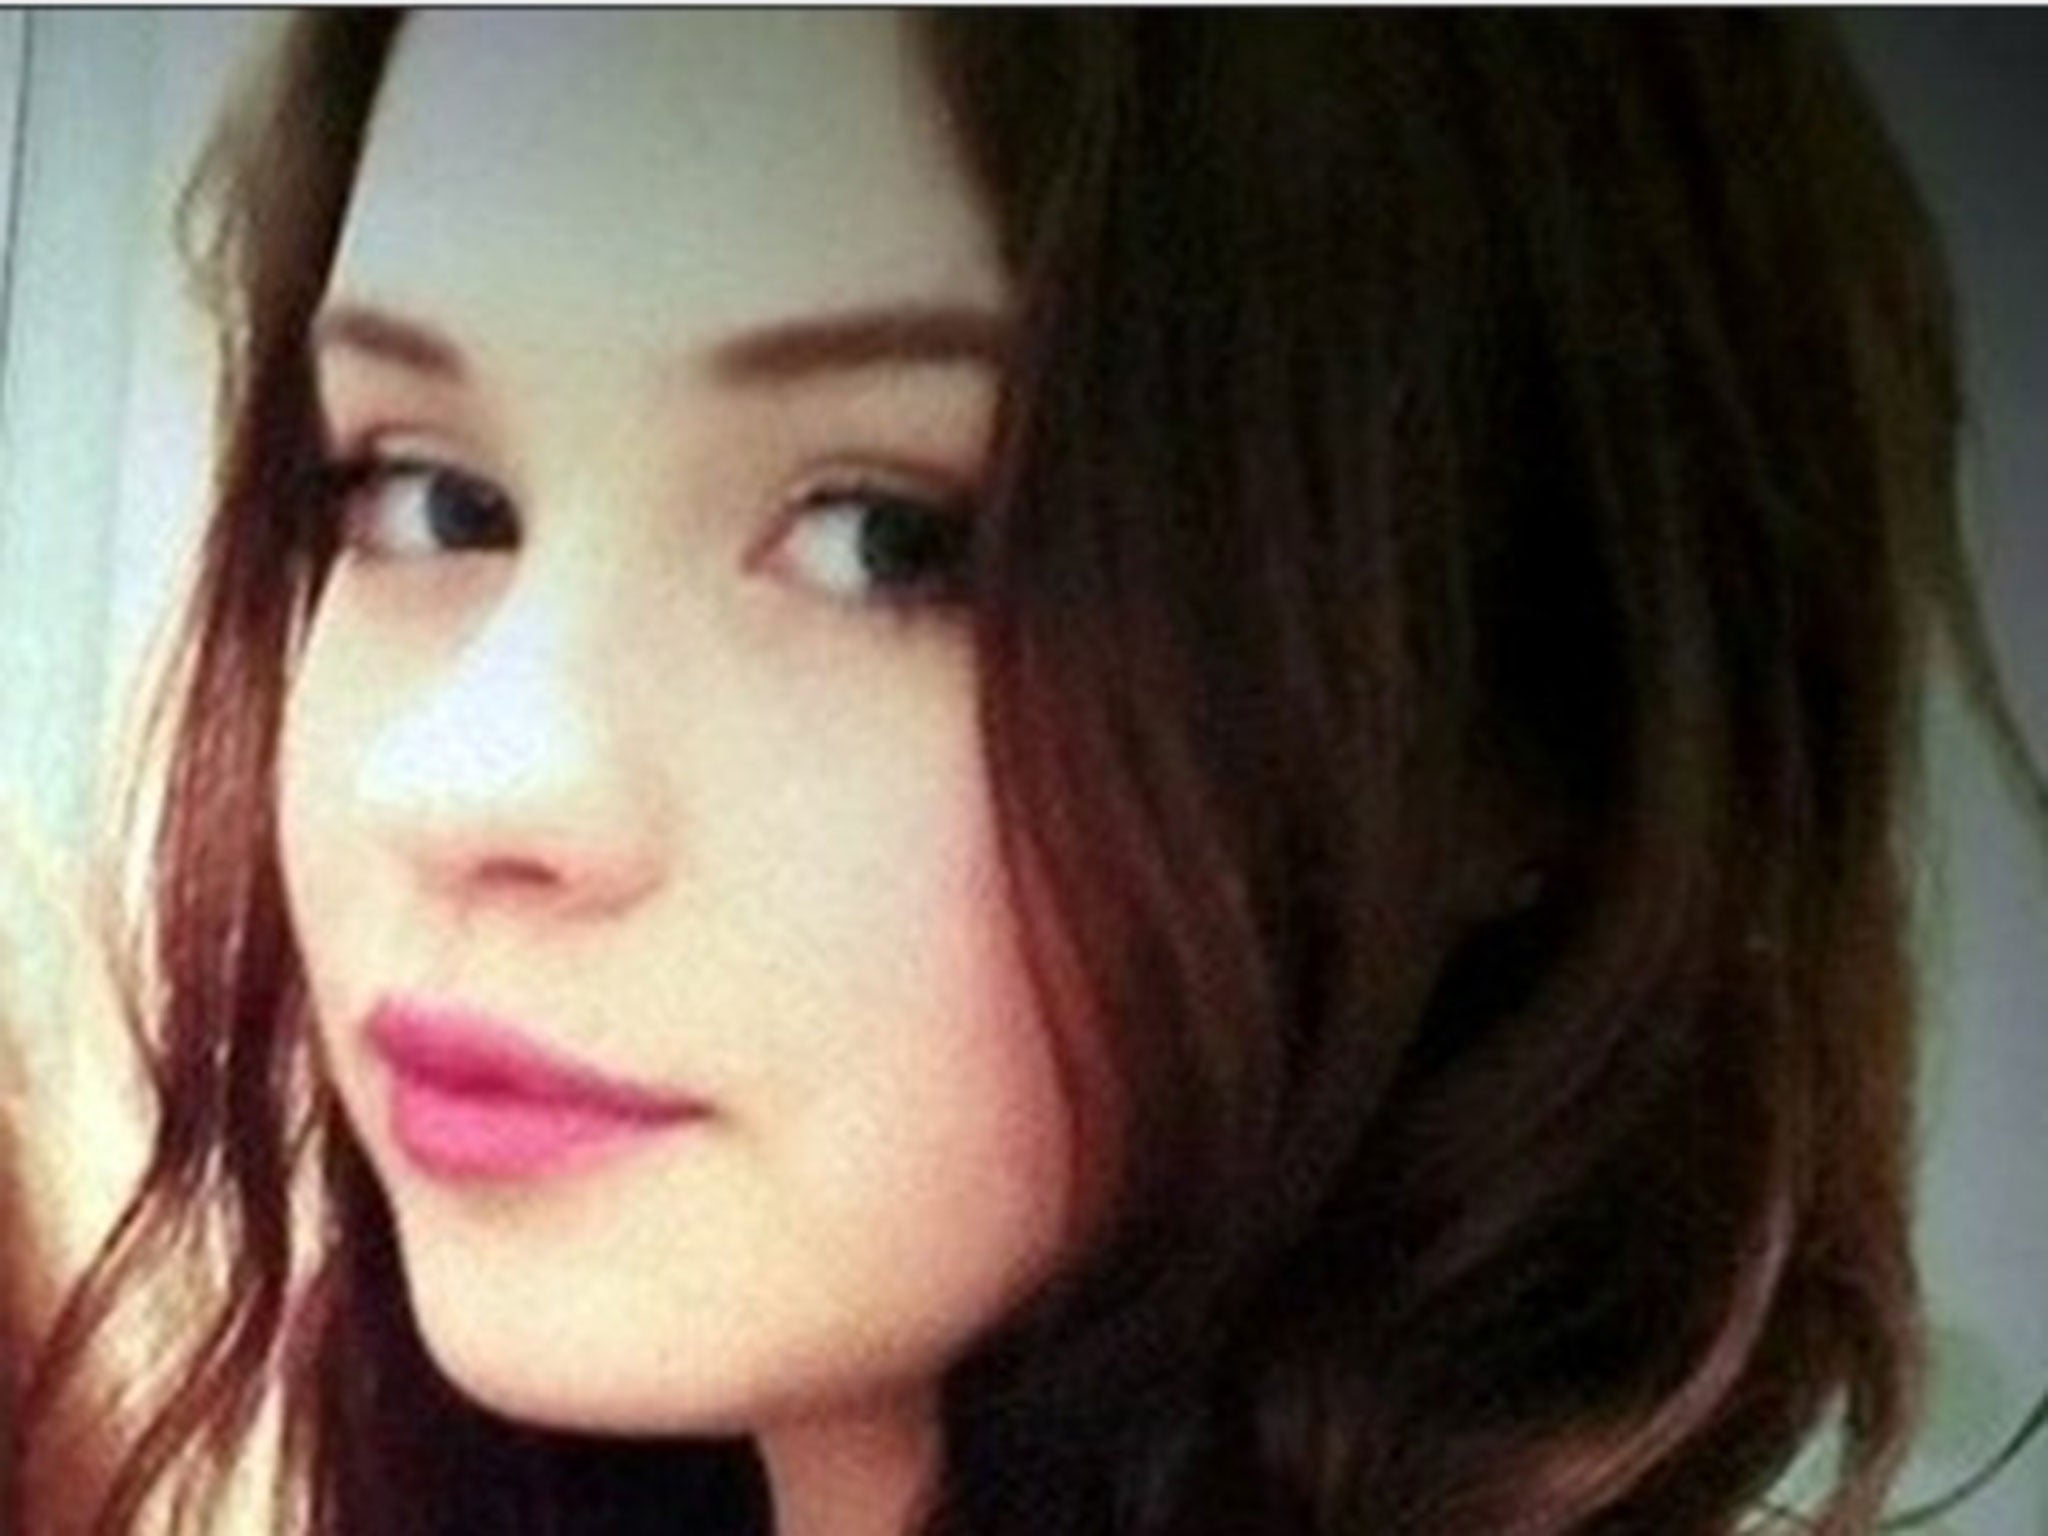 Becky Watts was killed in February